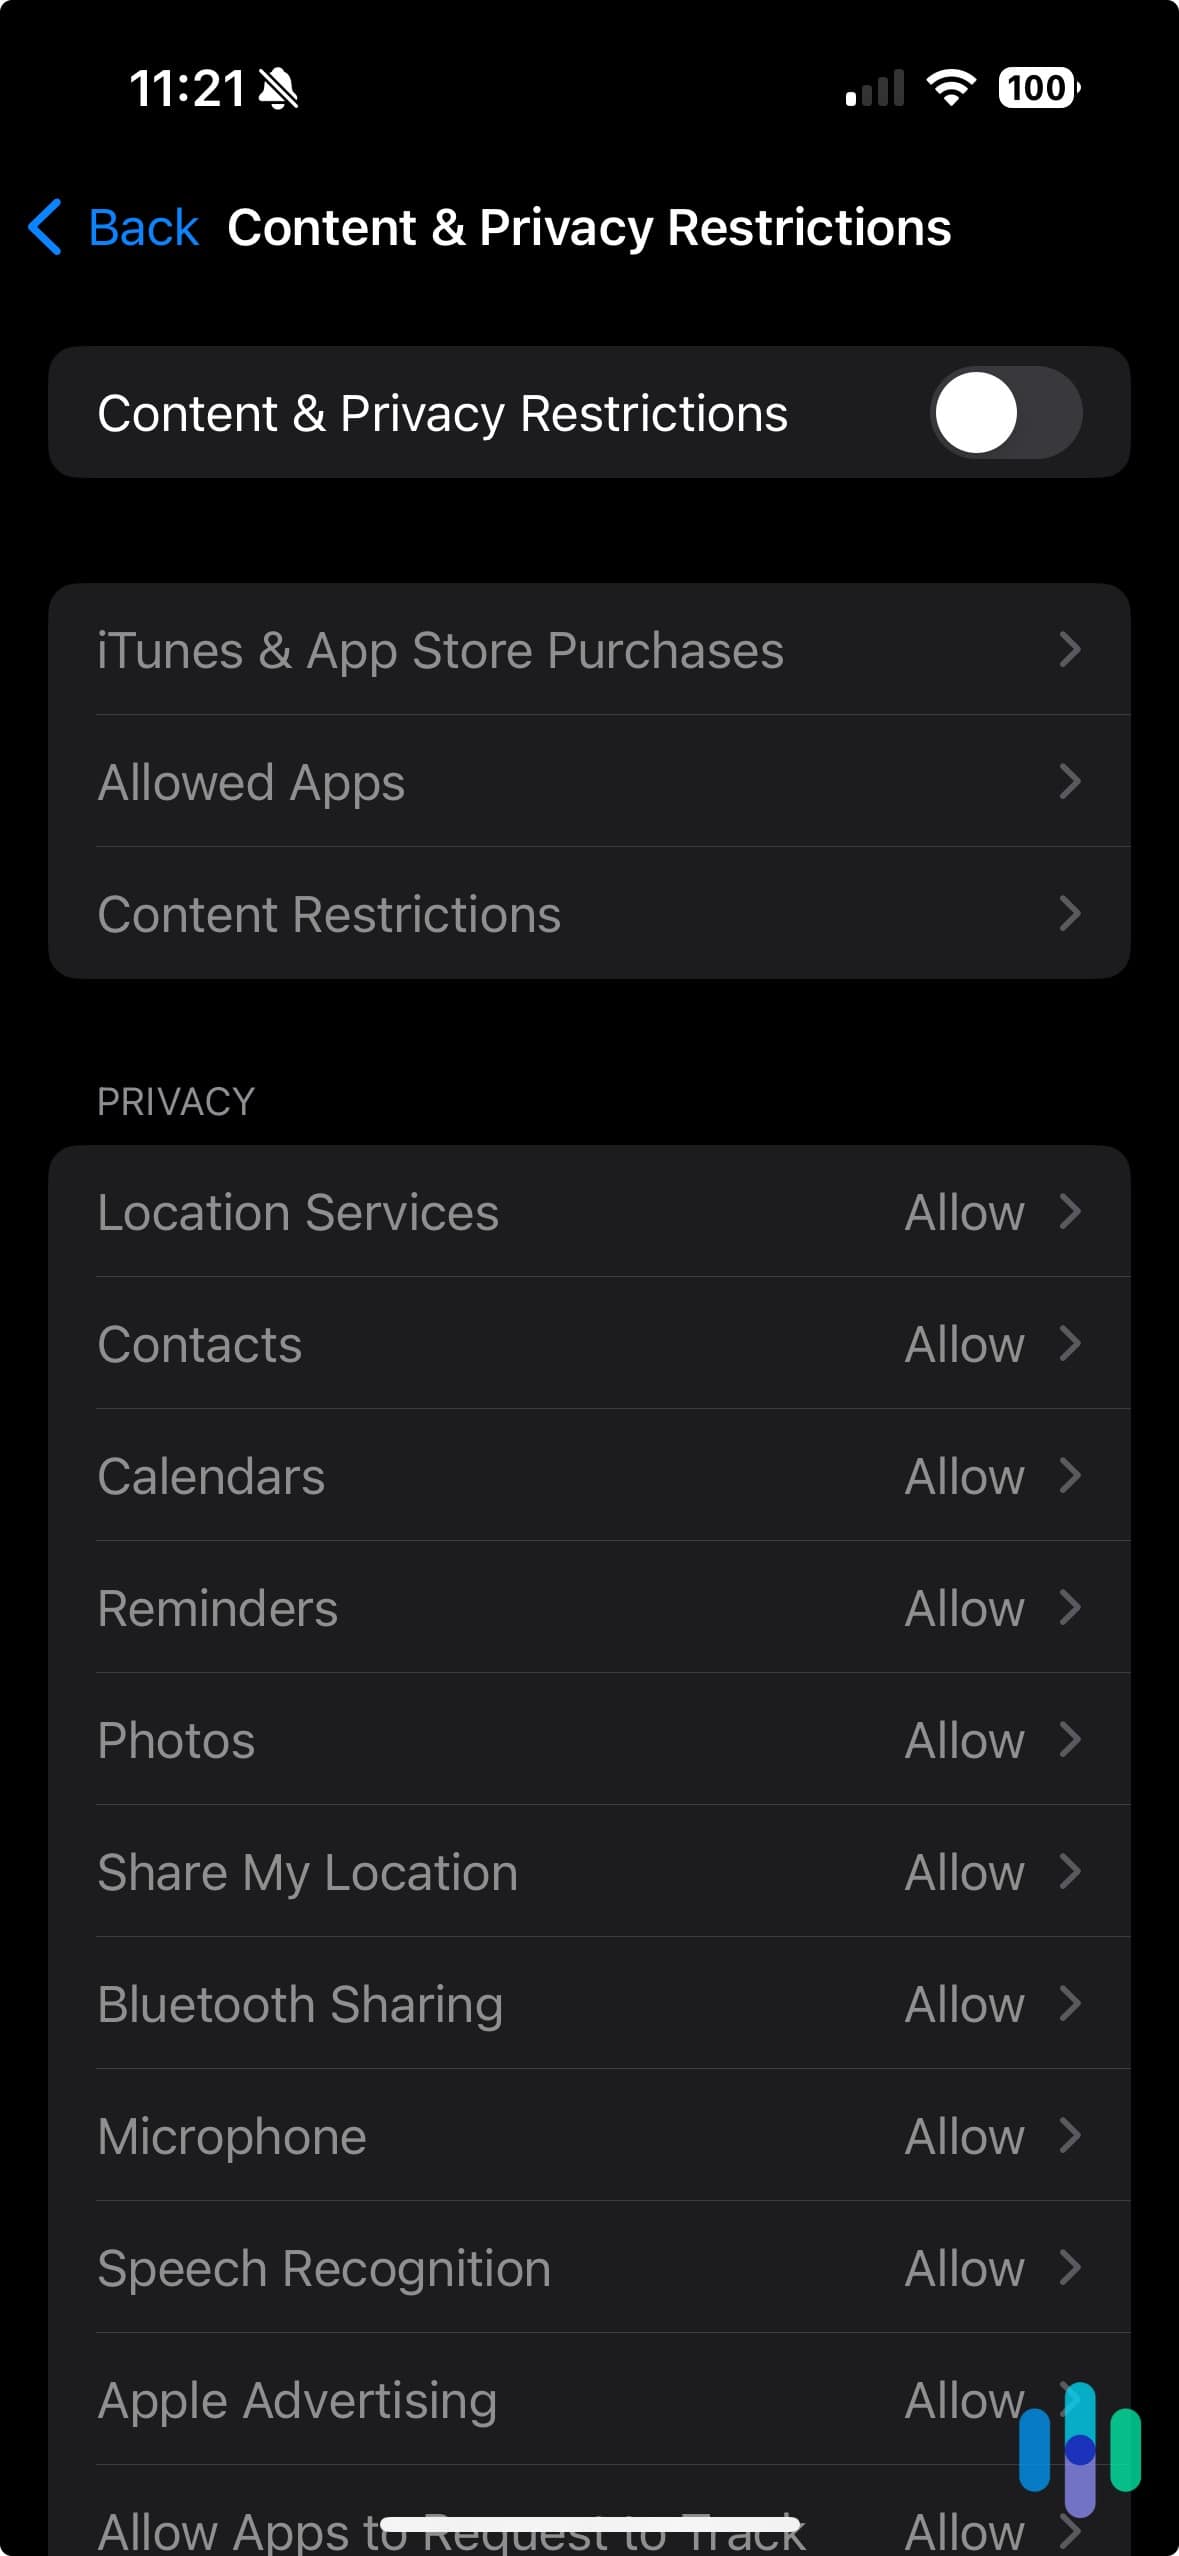 Content & Privacy Restrictions on an iPhone